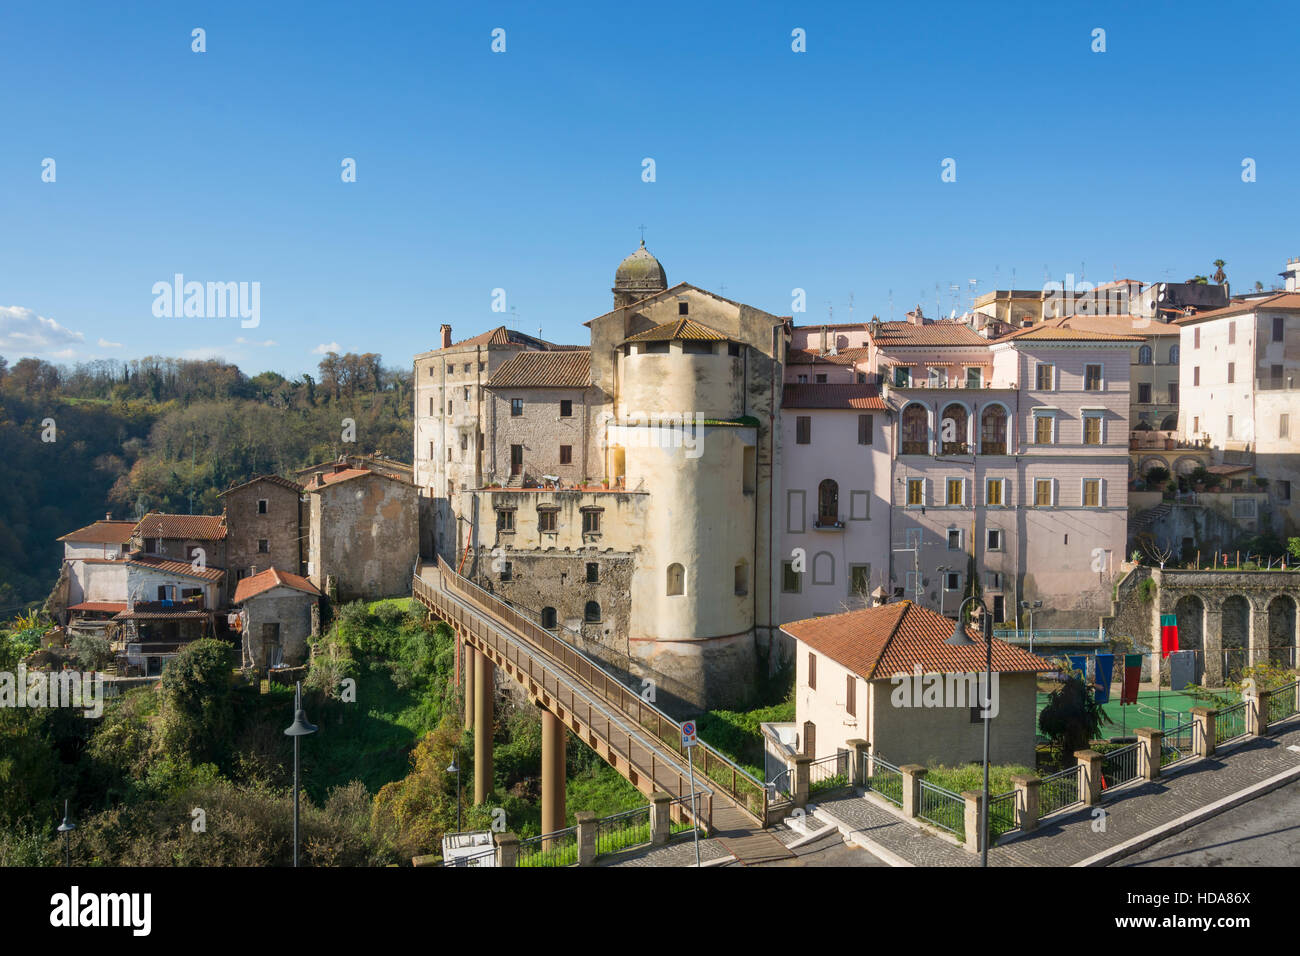 tower,town,stone,houses,rome,italy,travel,view,Alte,southern,church,UNESCO,heritage,architecture,city,blue,sky,ancient,europe,la Stock Photo